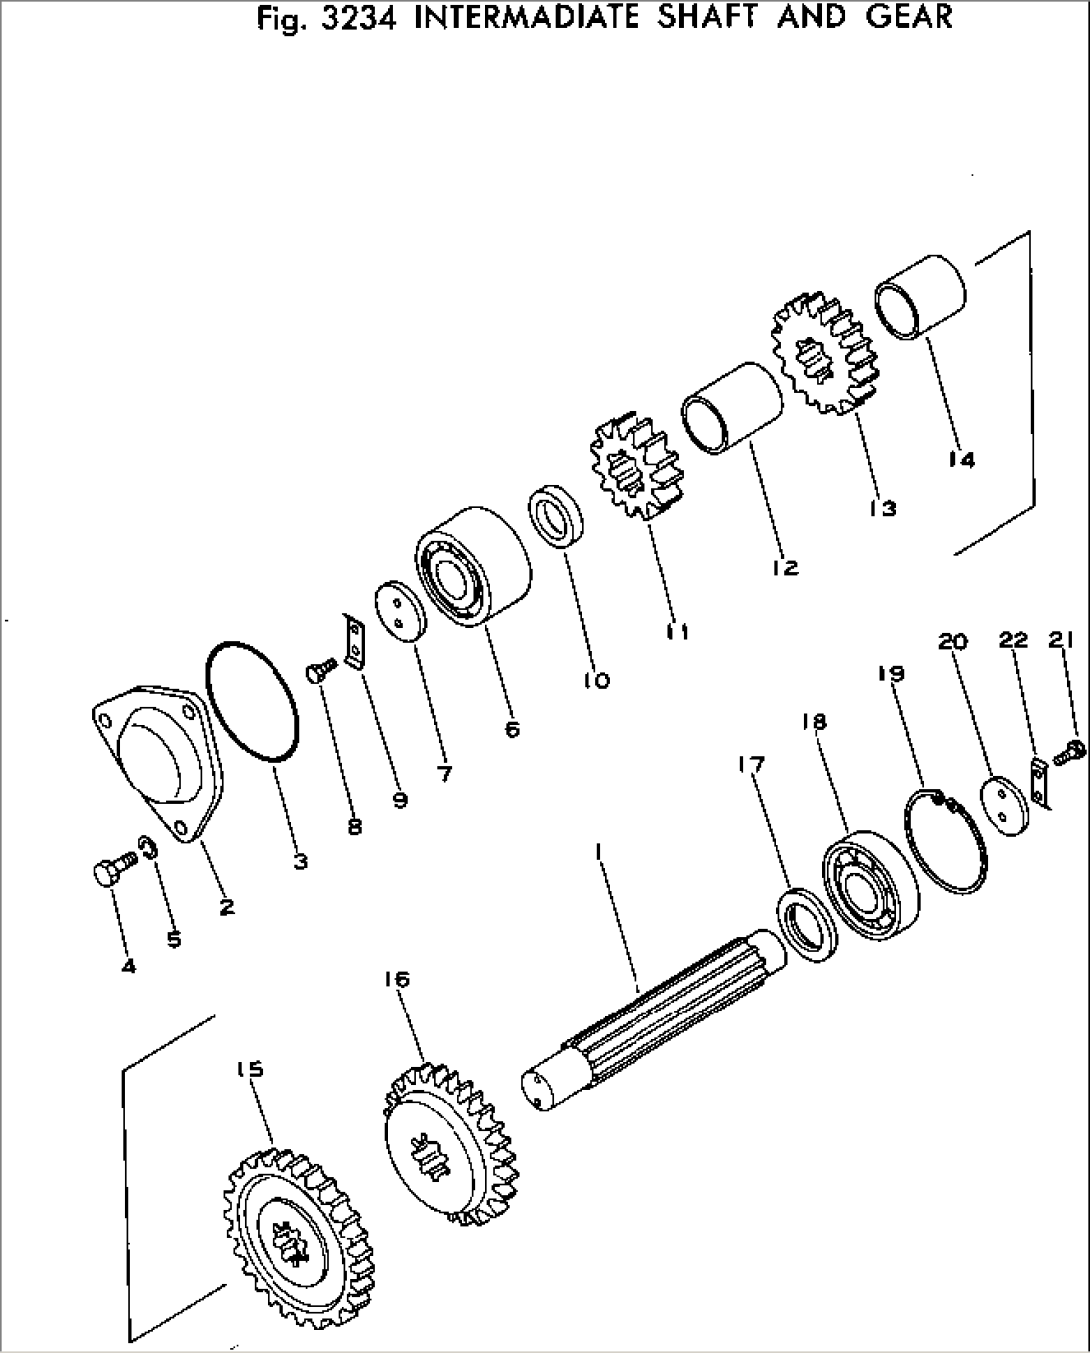 INTERMADIATE SHAFT AND GEAR